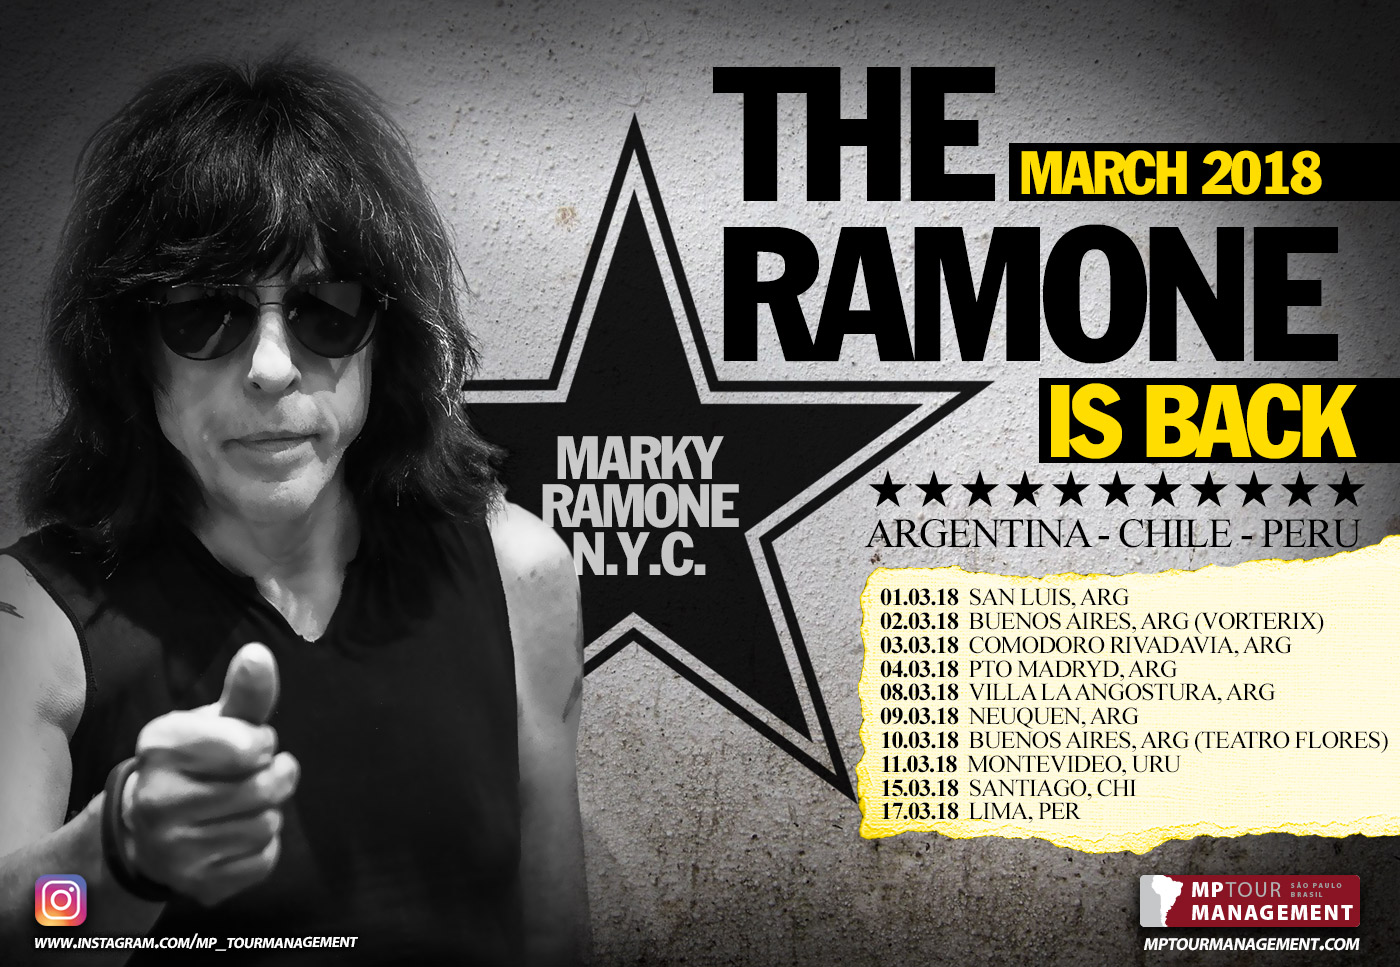 The Ramone is Back - March 2018 - Argentina - Chile - Peru